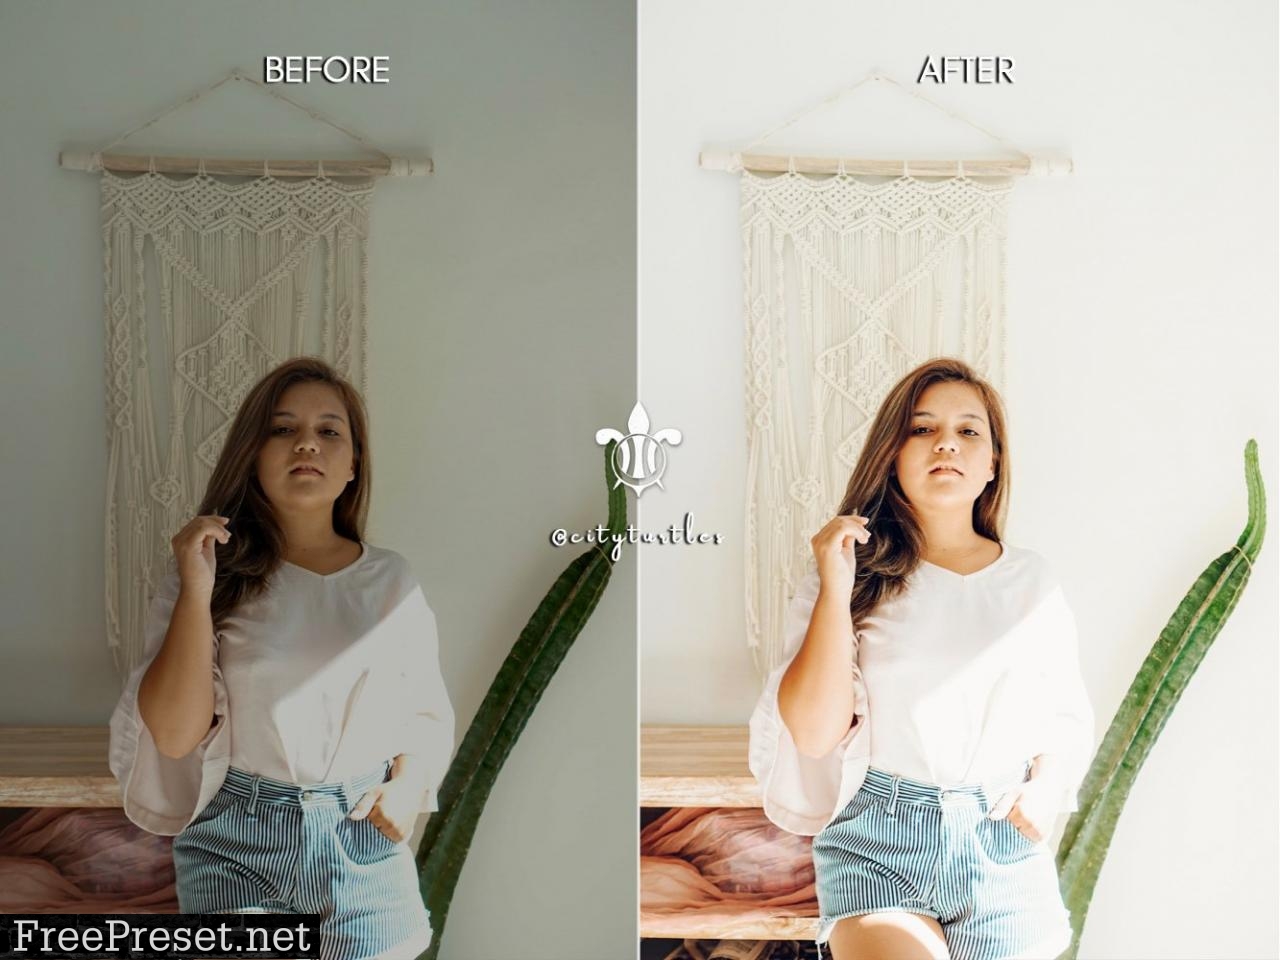 BRIGHT HOME Indoor Mobile Presets 4957852